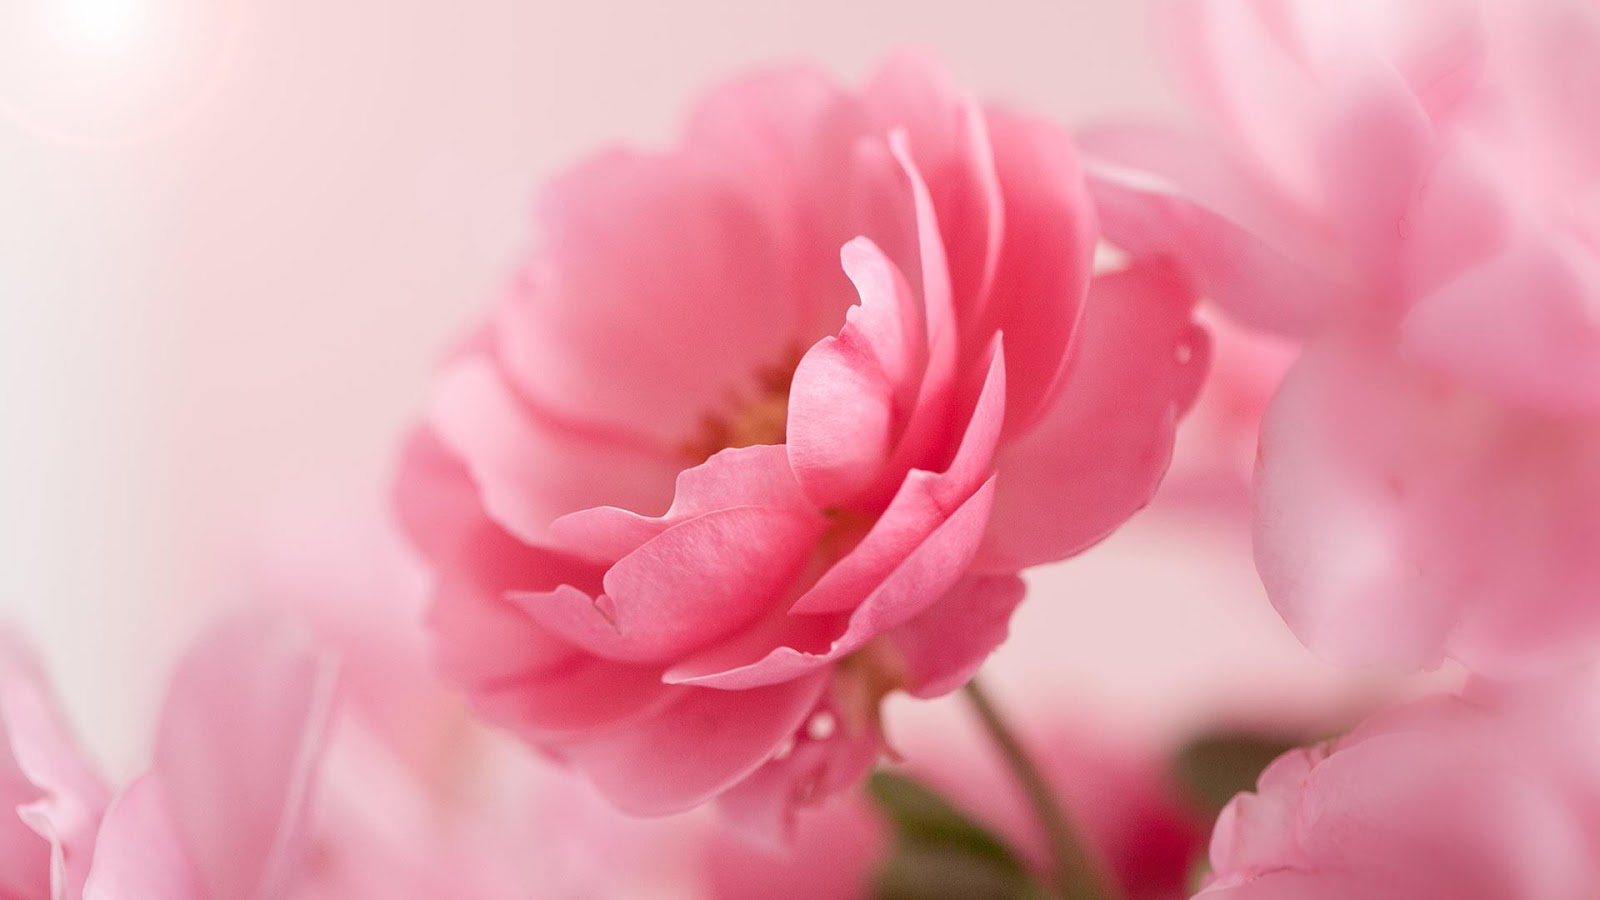 Roses Live Wallpaper Which Brings You Romantic Background Pictures Of